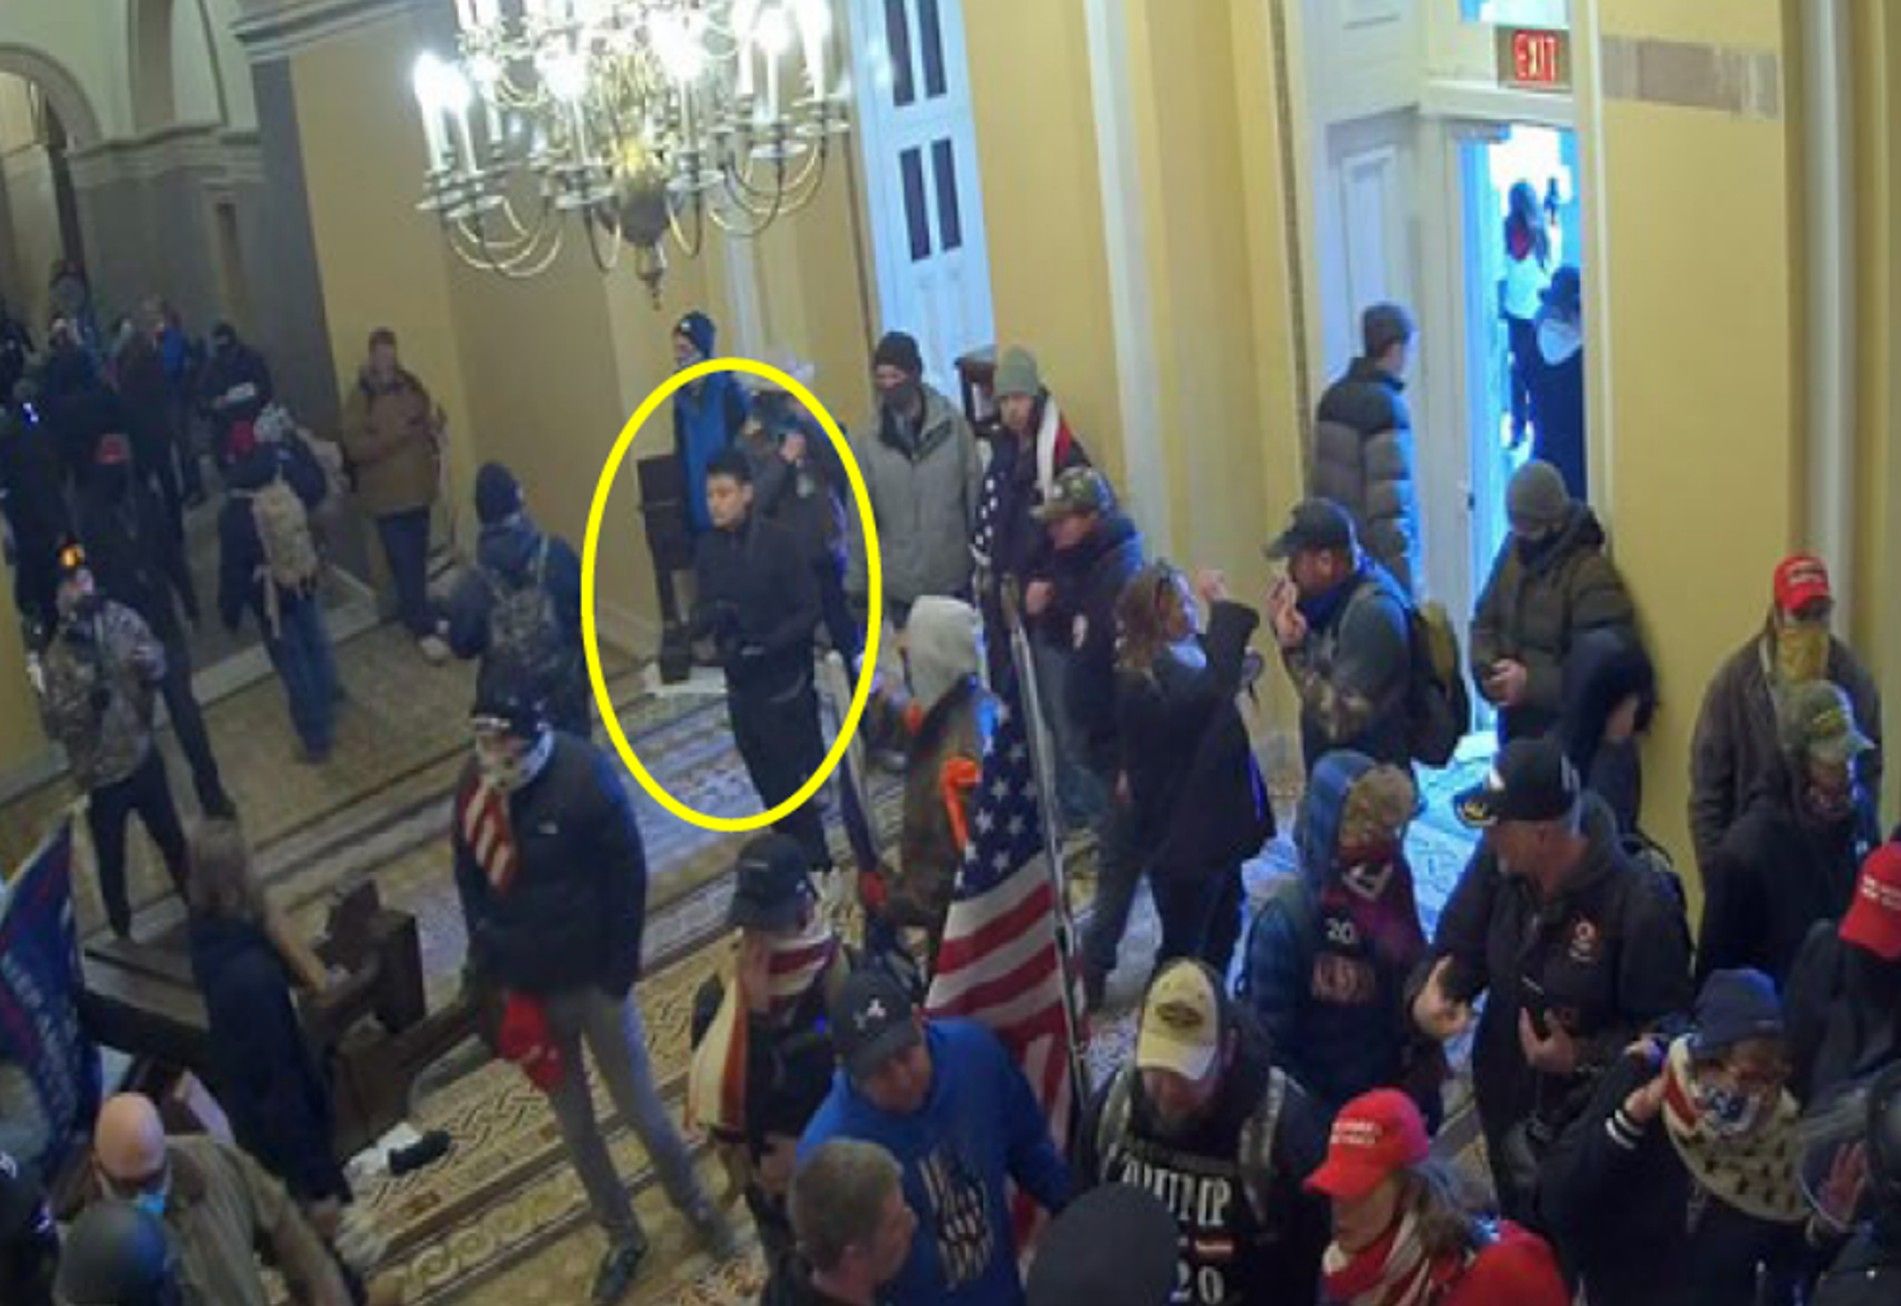 Circle around an image of a man, whom the FBI allege is Kevin Alstrup,  inside the U.S. Capitol.